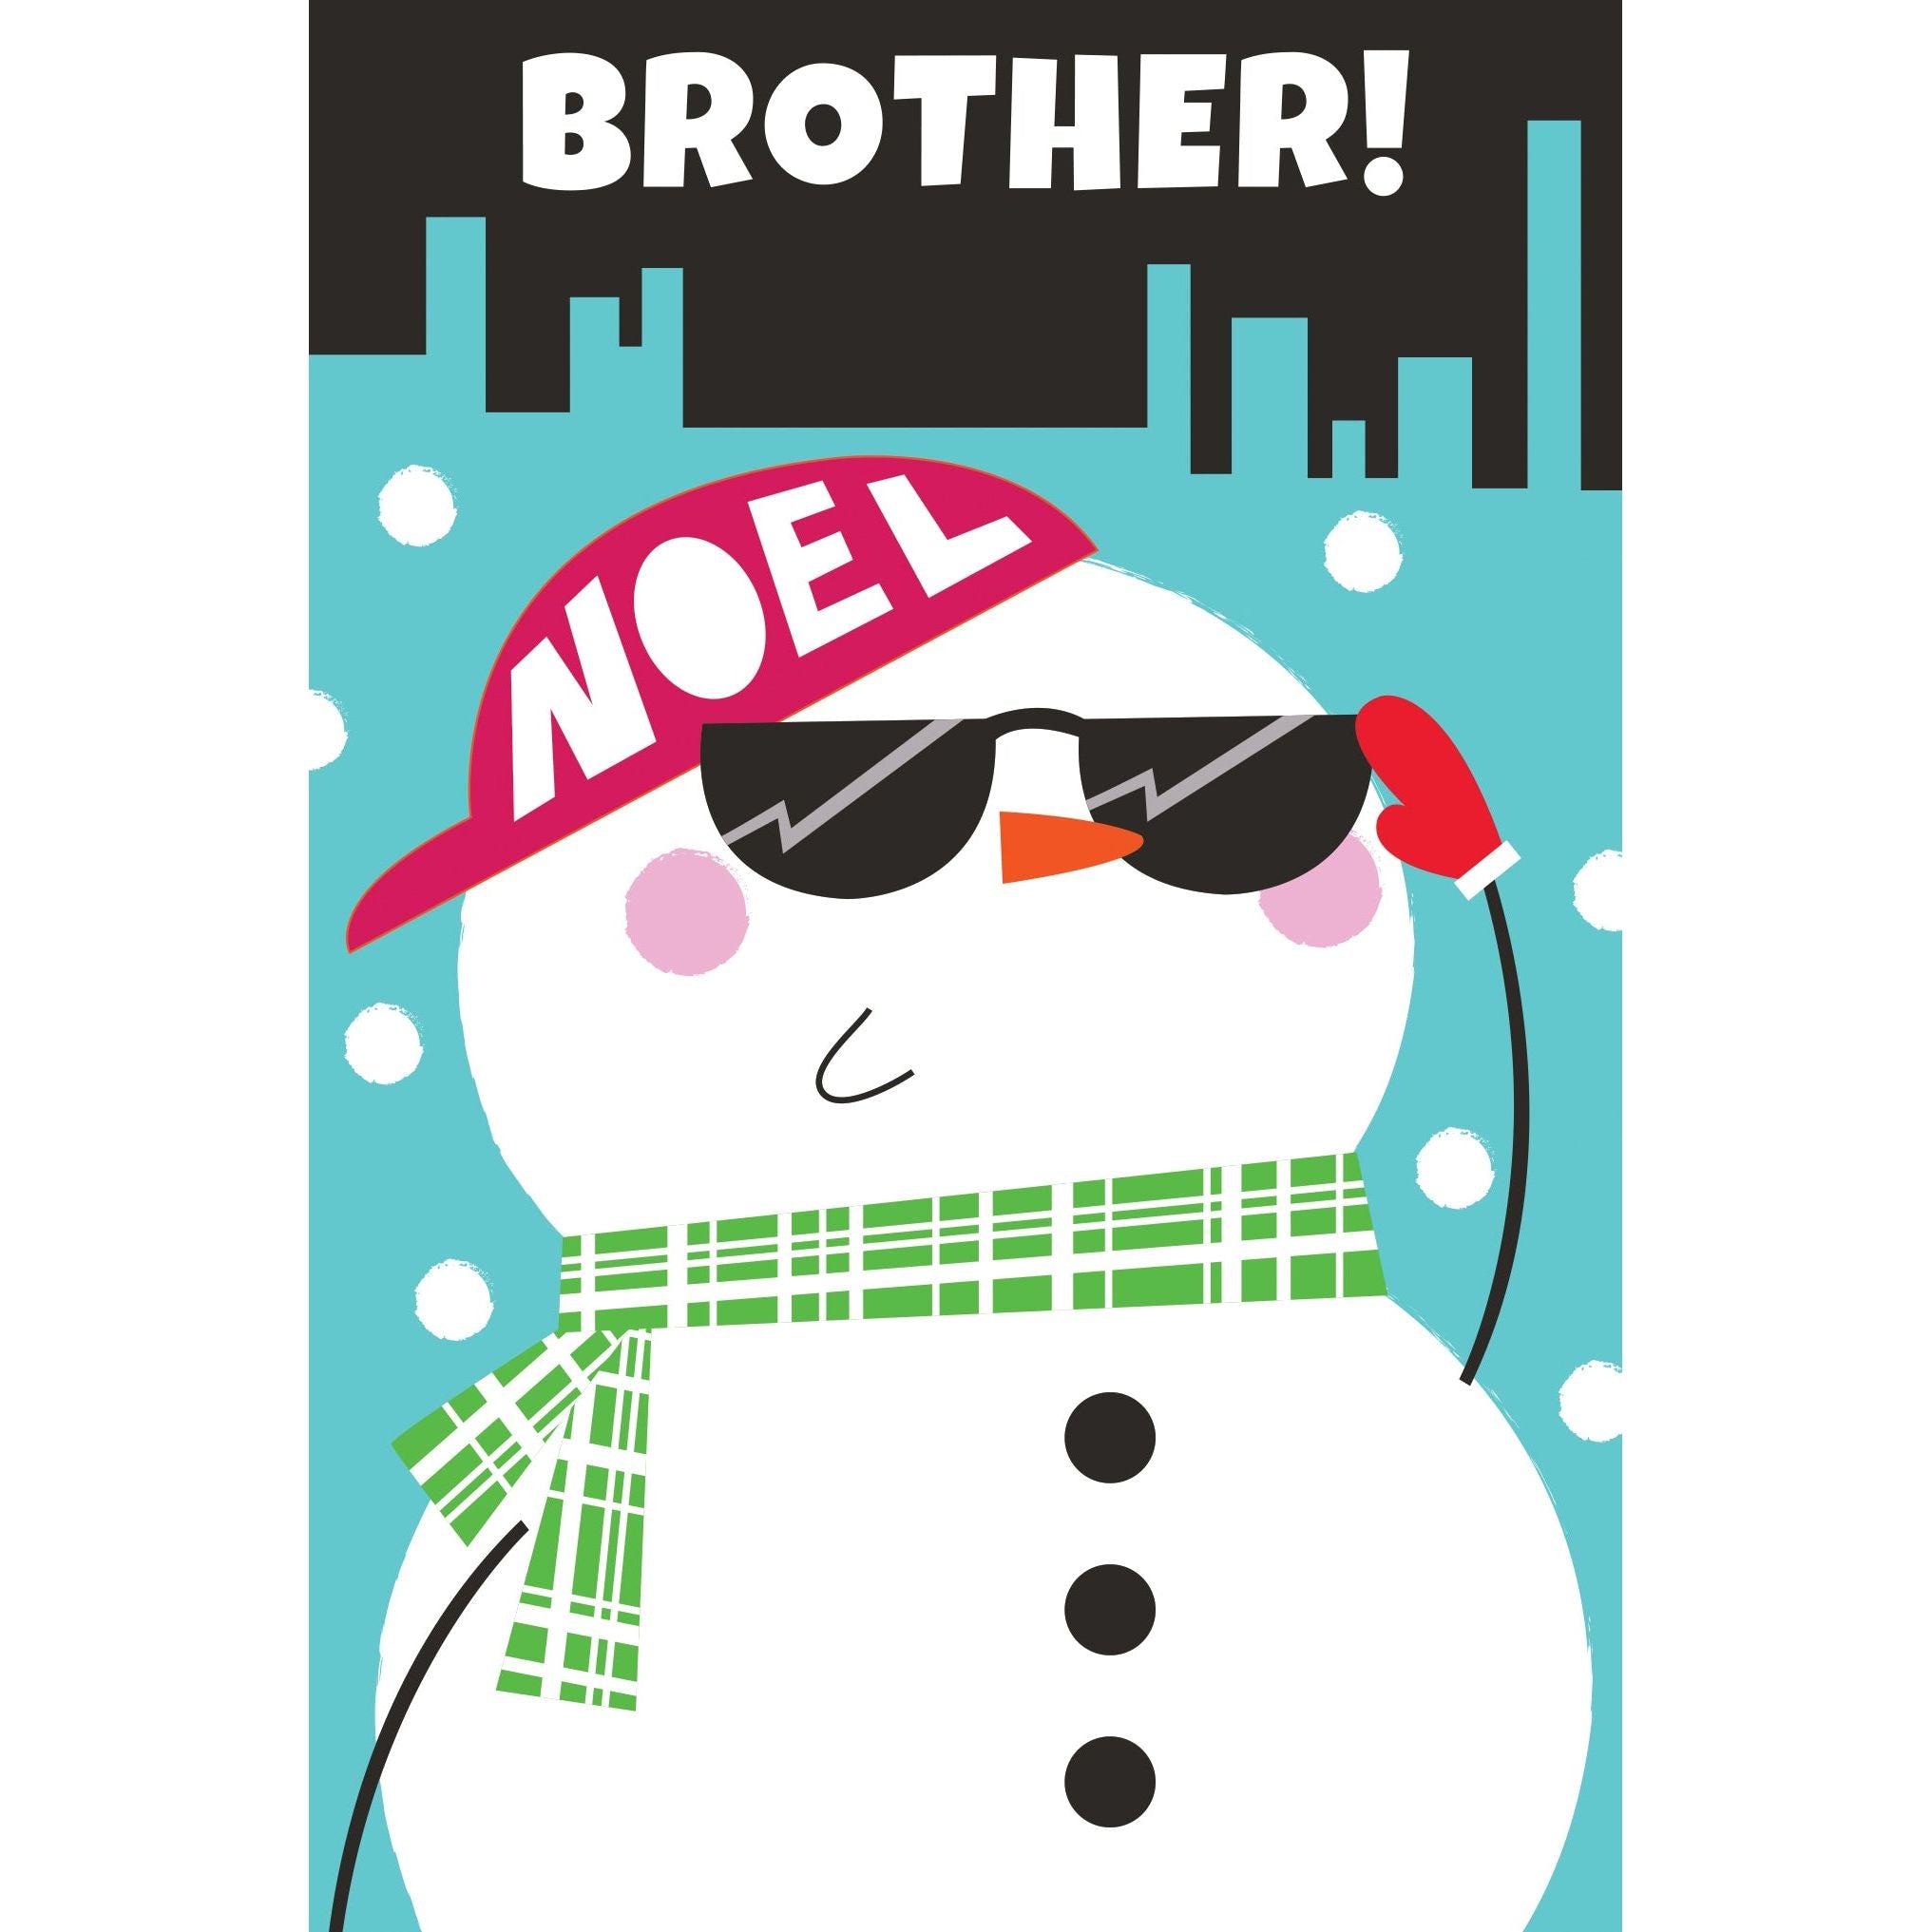 Brother Noel - Christmas Card - Cardmore